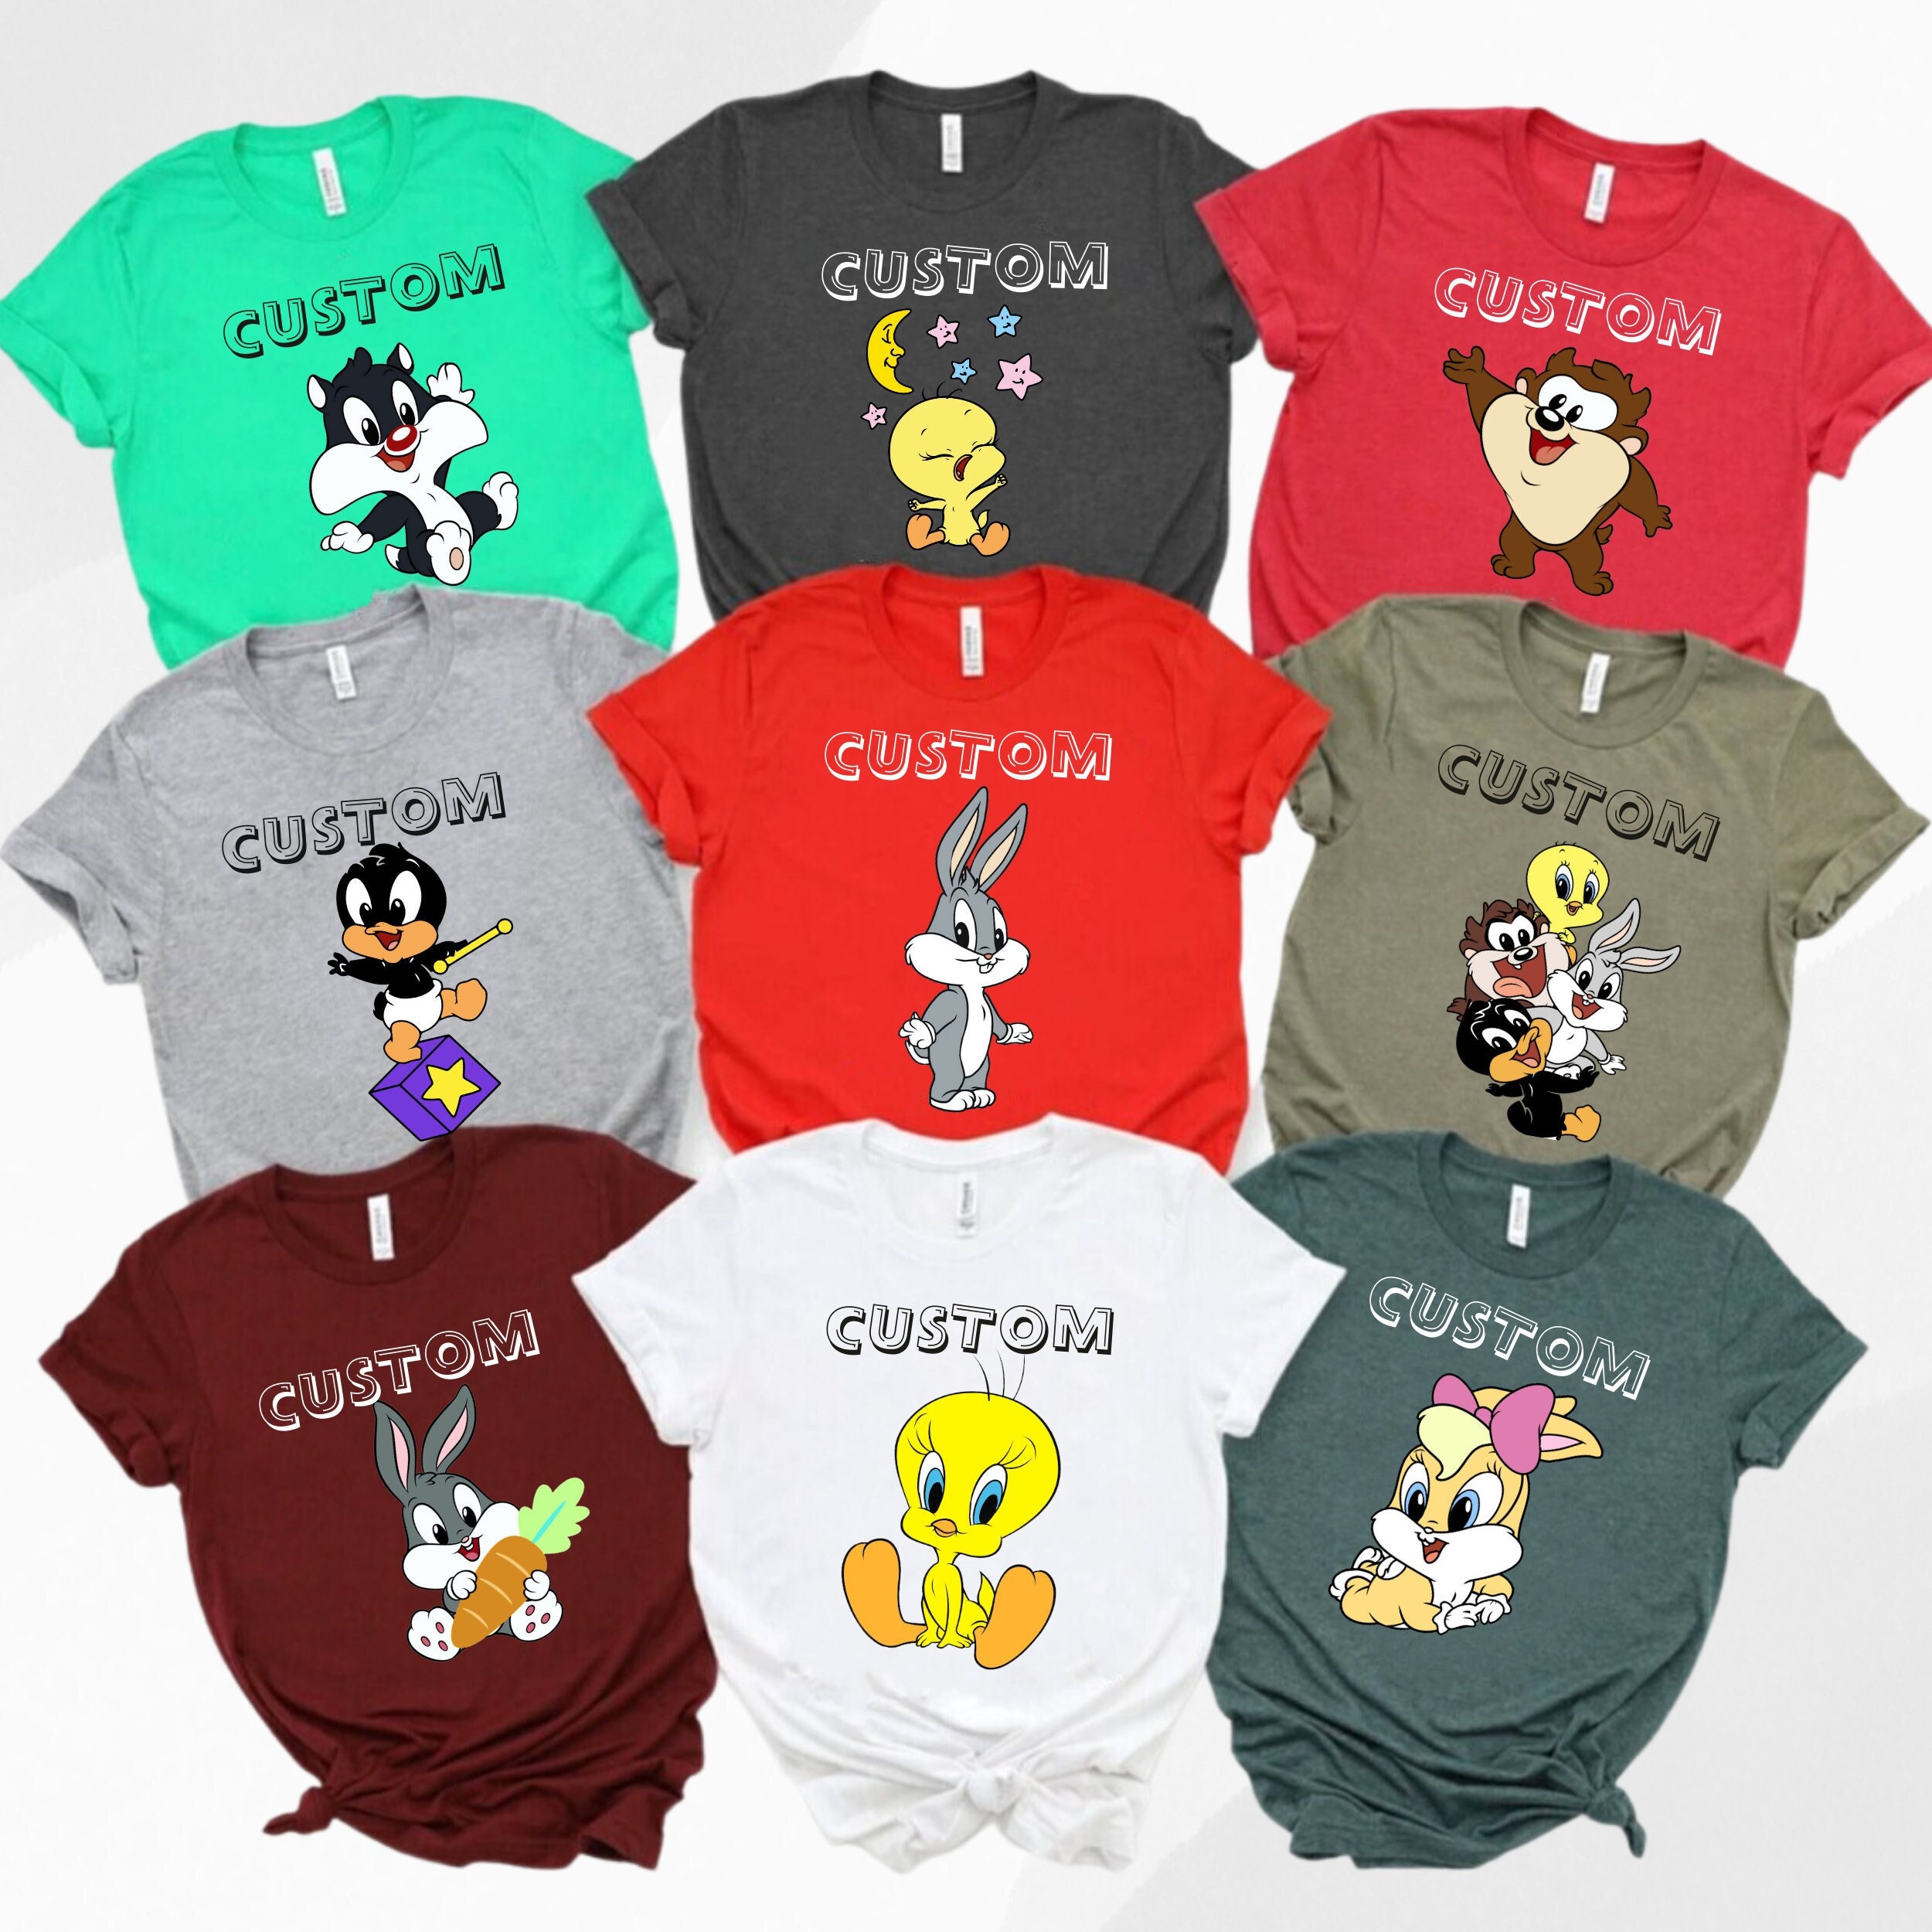 Golden State Warriors Looney Tunes Marvin the Martian Graphic T-Shirt - Mens